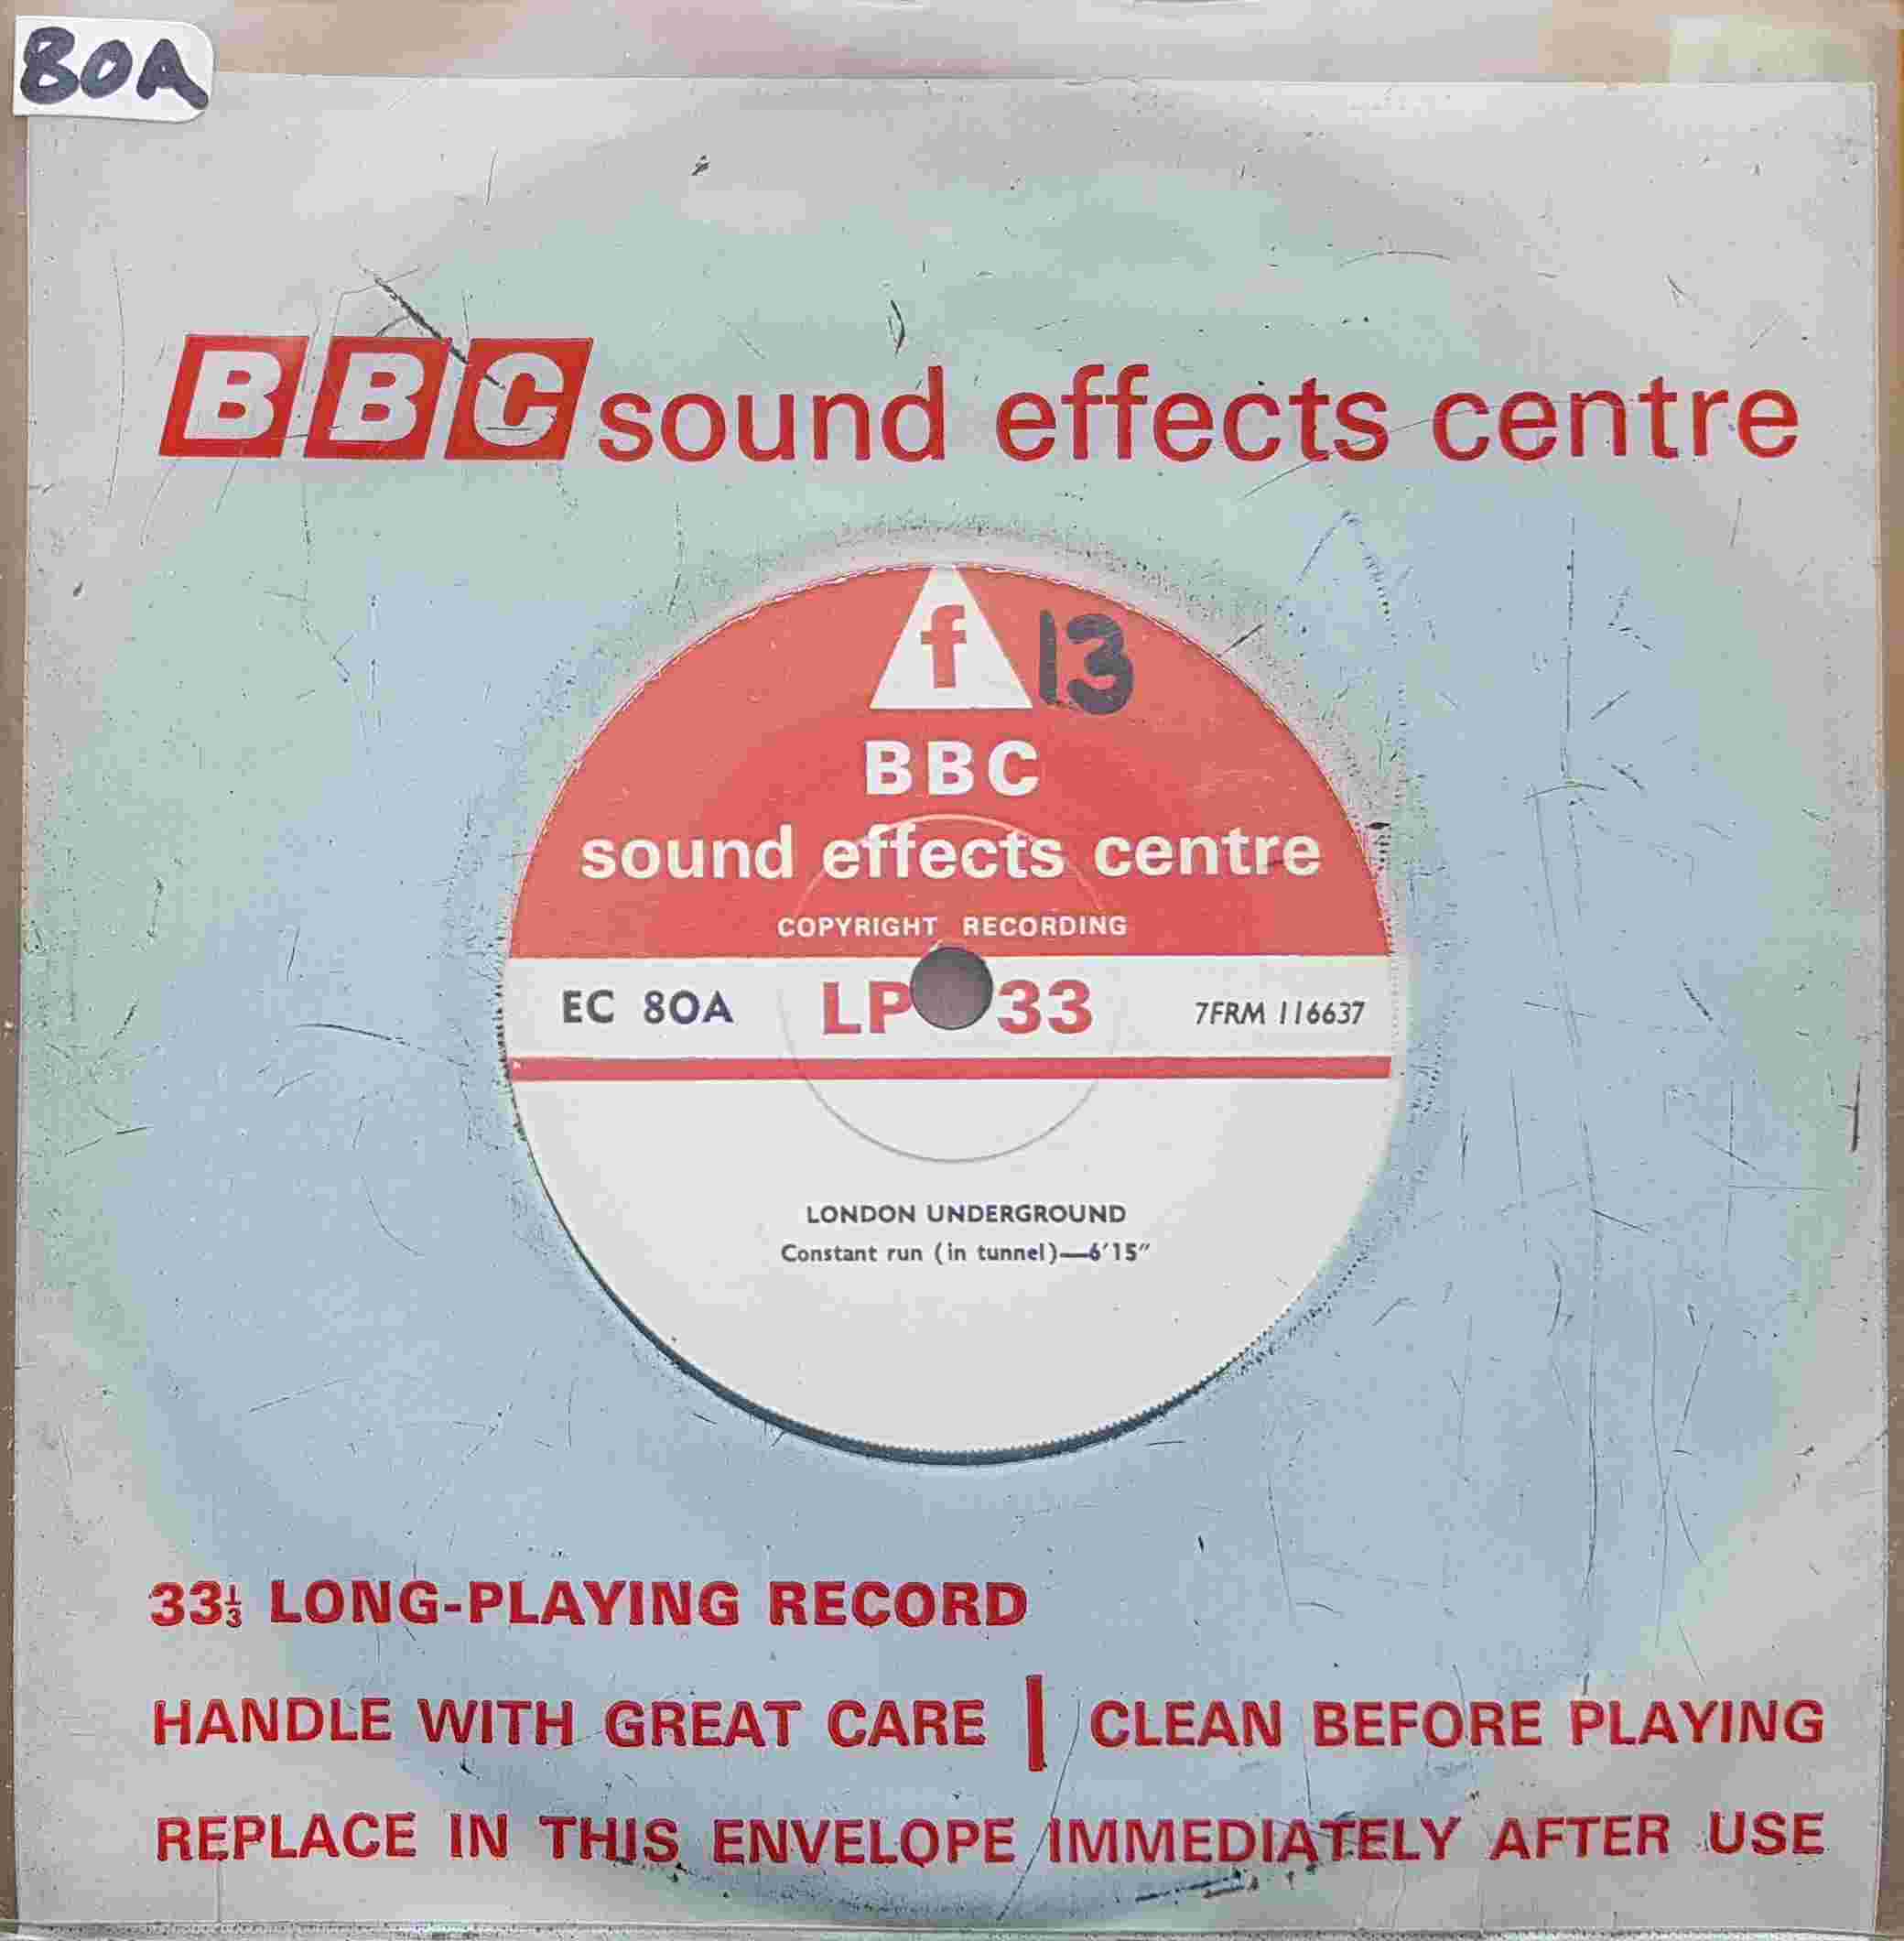 Picture of EC 80A London Underground by artist Not registered from the BBC singles - Records and Tapes library